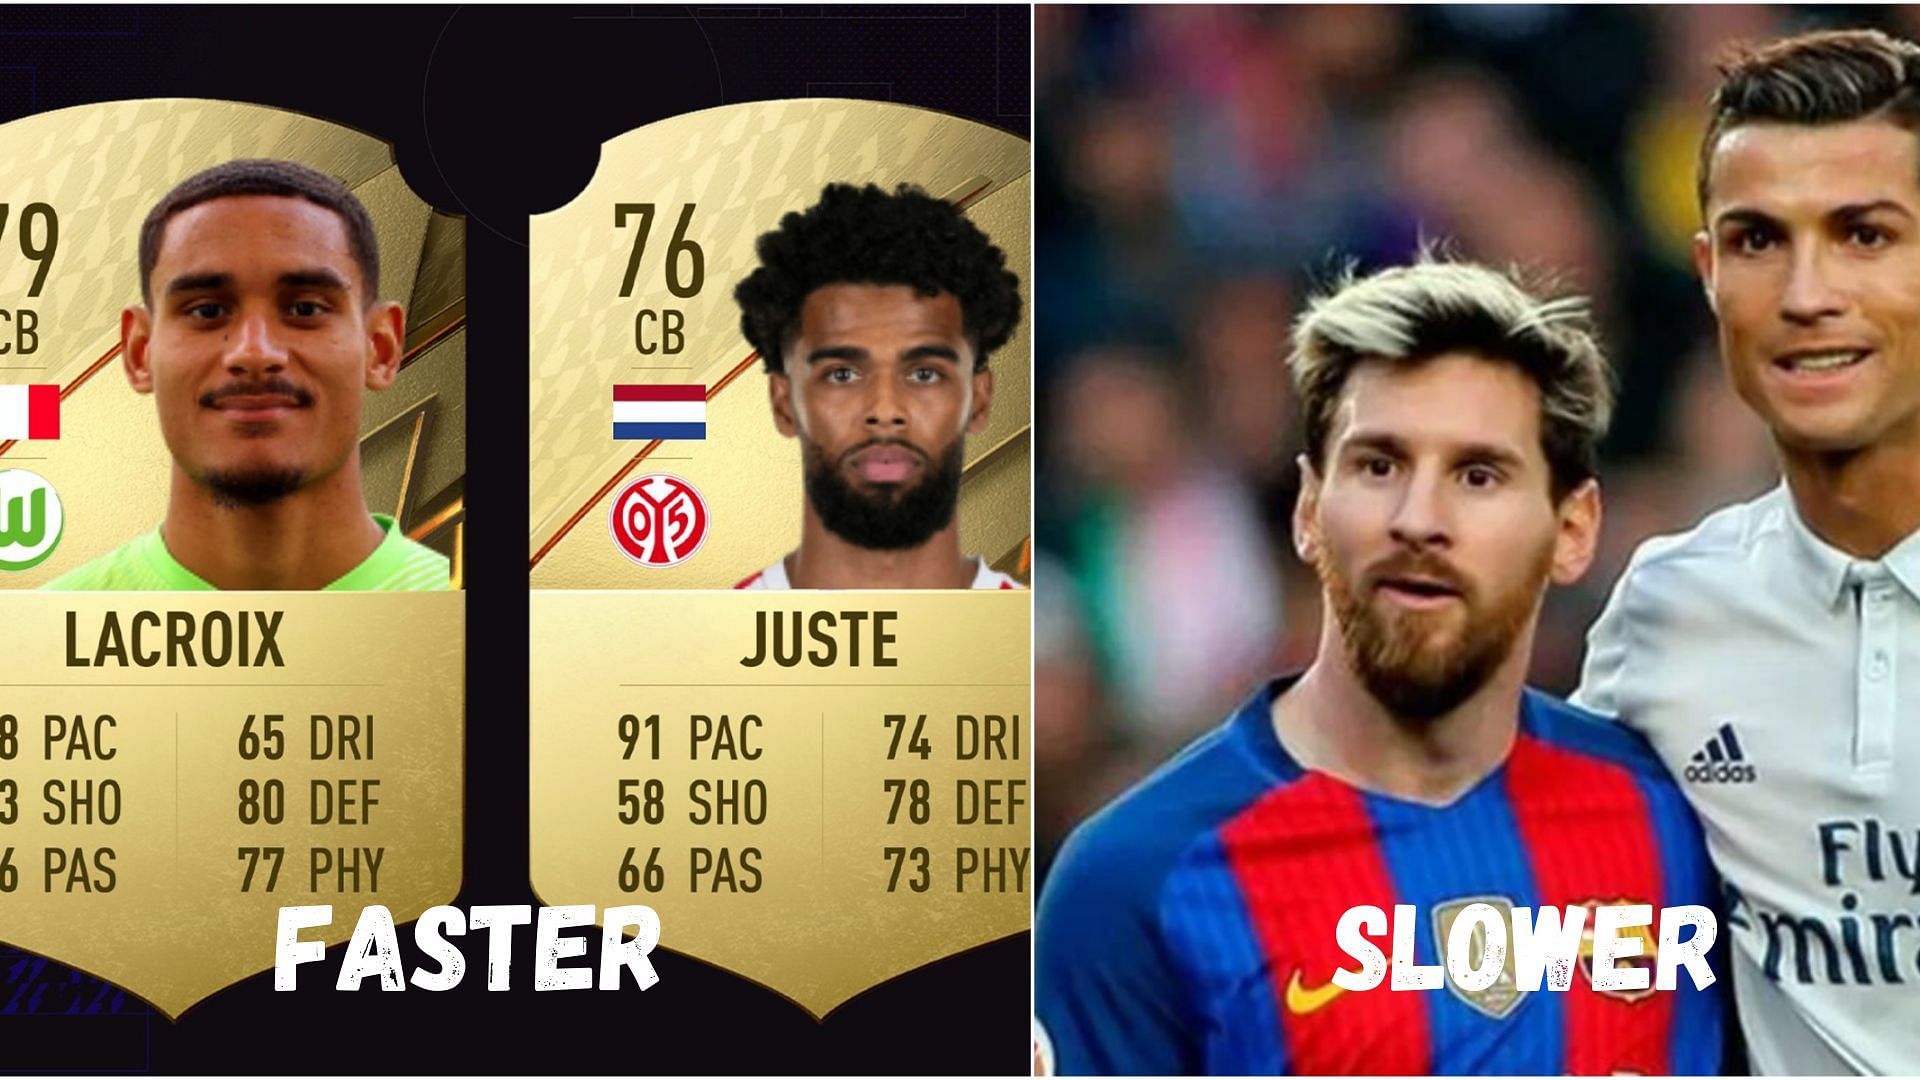 Lacroix and St. Juste are faster than some of the best attacking players in FIFA 22